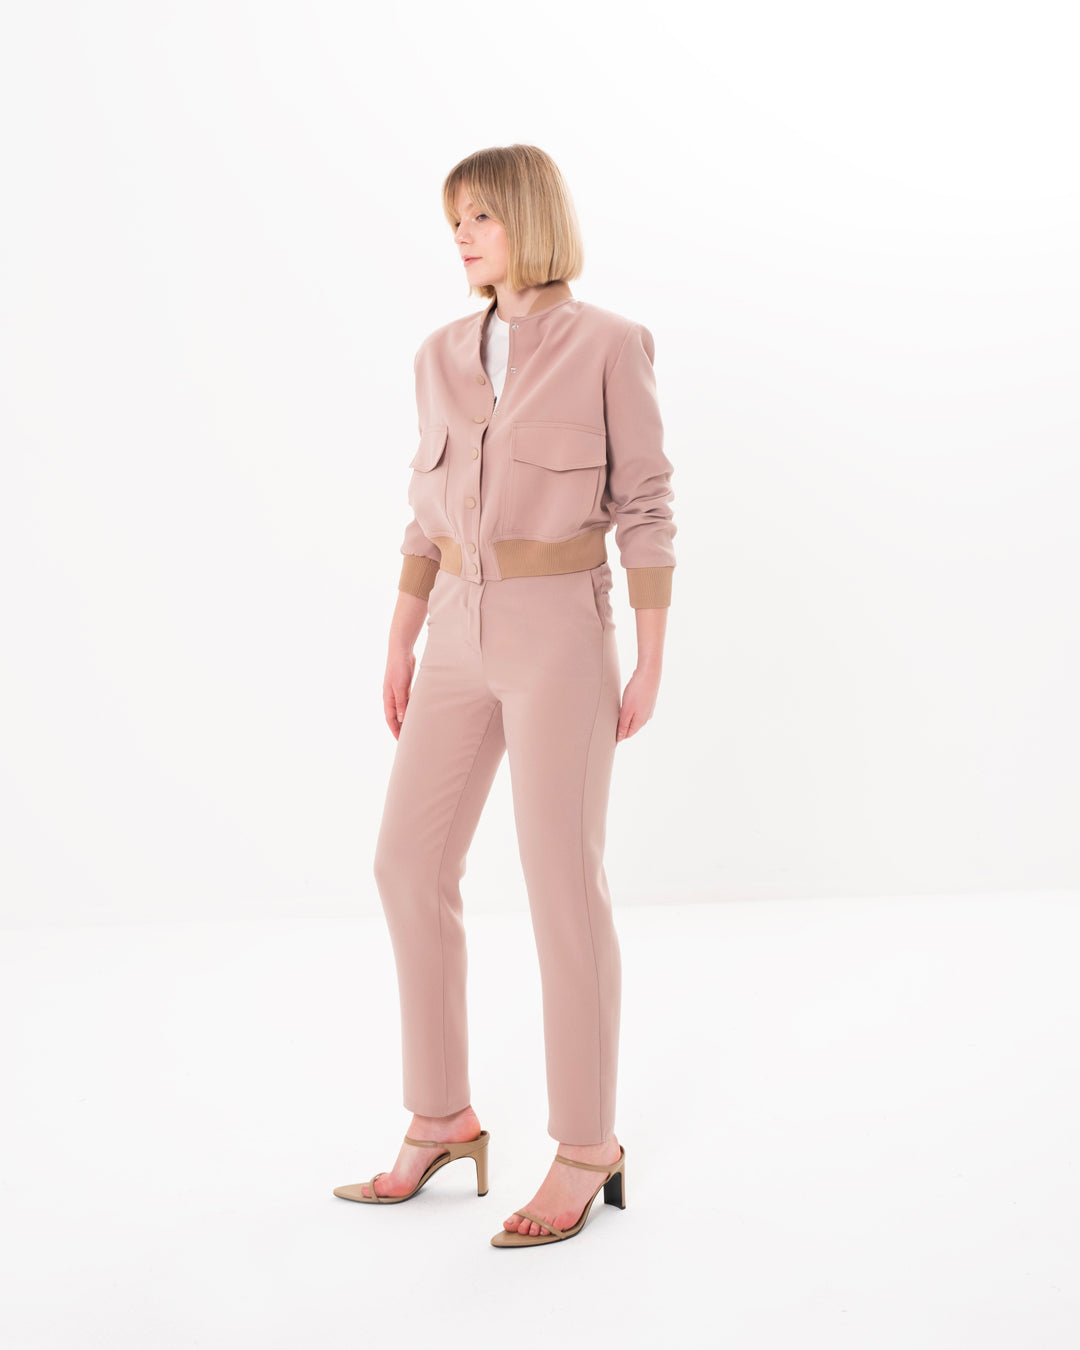 Jacket-Trousers Set with Elasticated Collar, Sleeves and Waist